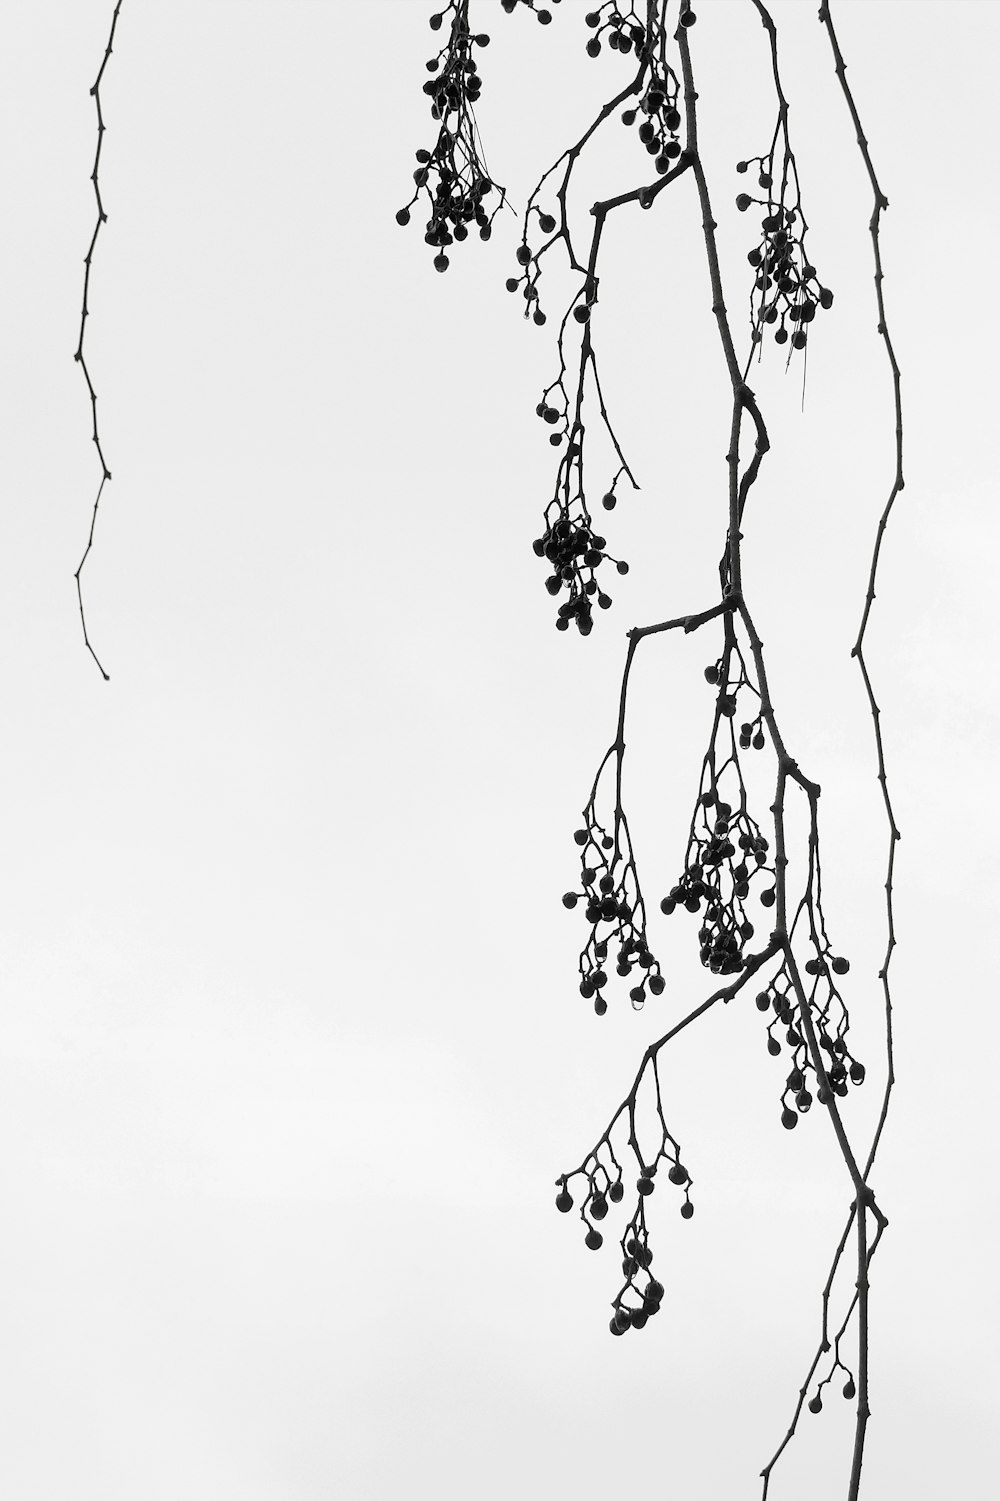 a black and white photo of a tree branch with berries